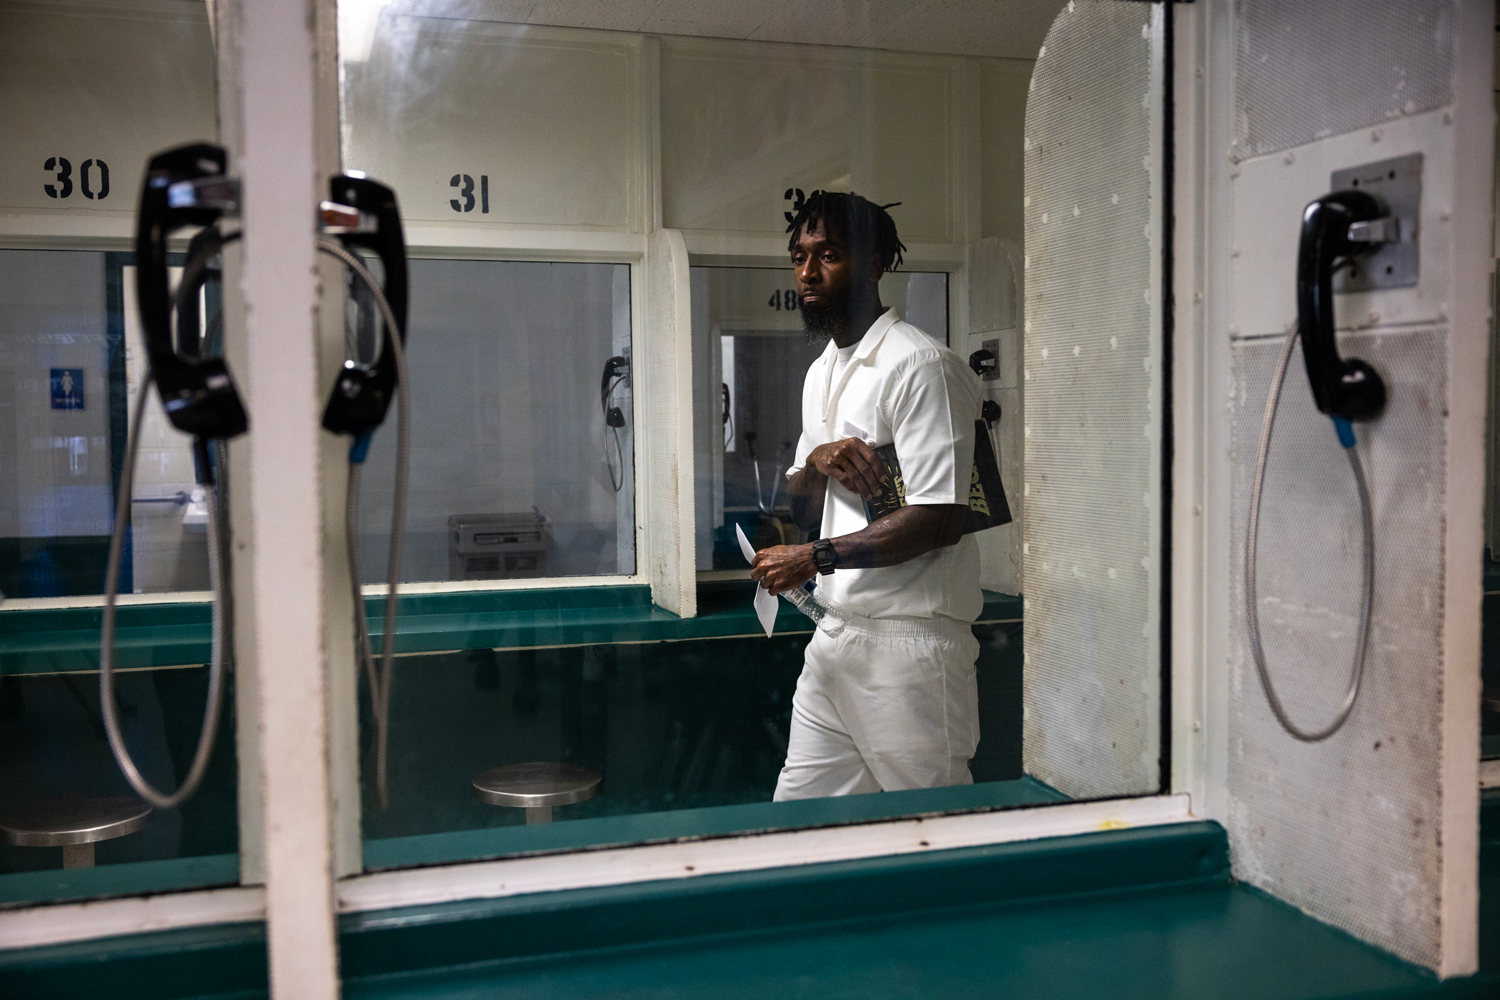 Jared Daniel walks to a visitation booth to sit down for an interview at the Mark W. Stiles Unit, Thursday, Dec. 7, 2023, in Beaumont. Daniel is serving a life sentence without the possibility of parole for a double homicide. He filed a writ of habeas corpus in 2011 arguing he was wrongfully convicted, but his writ languished for years.